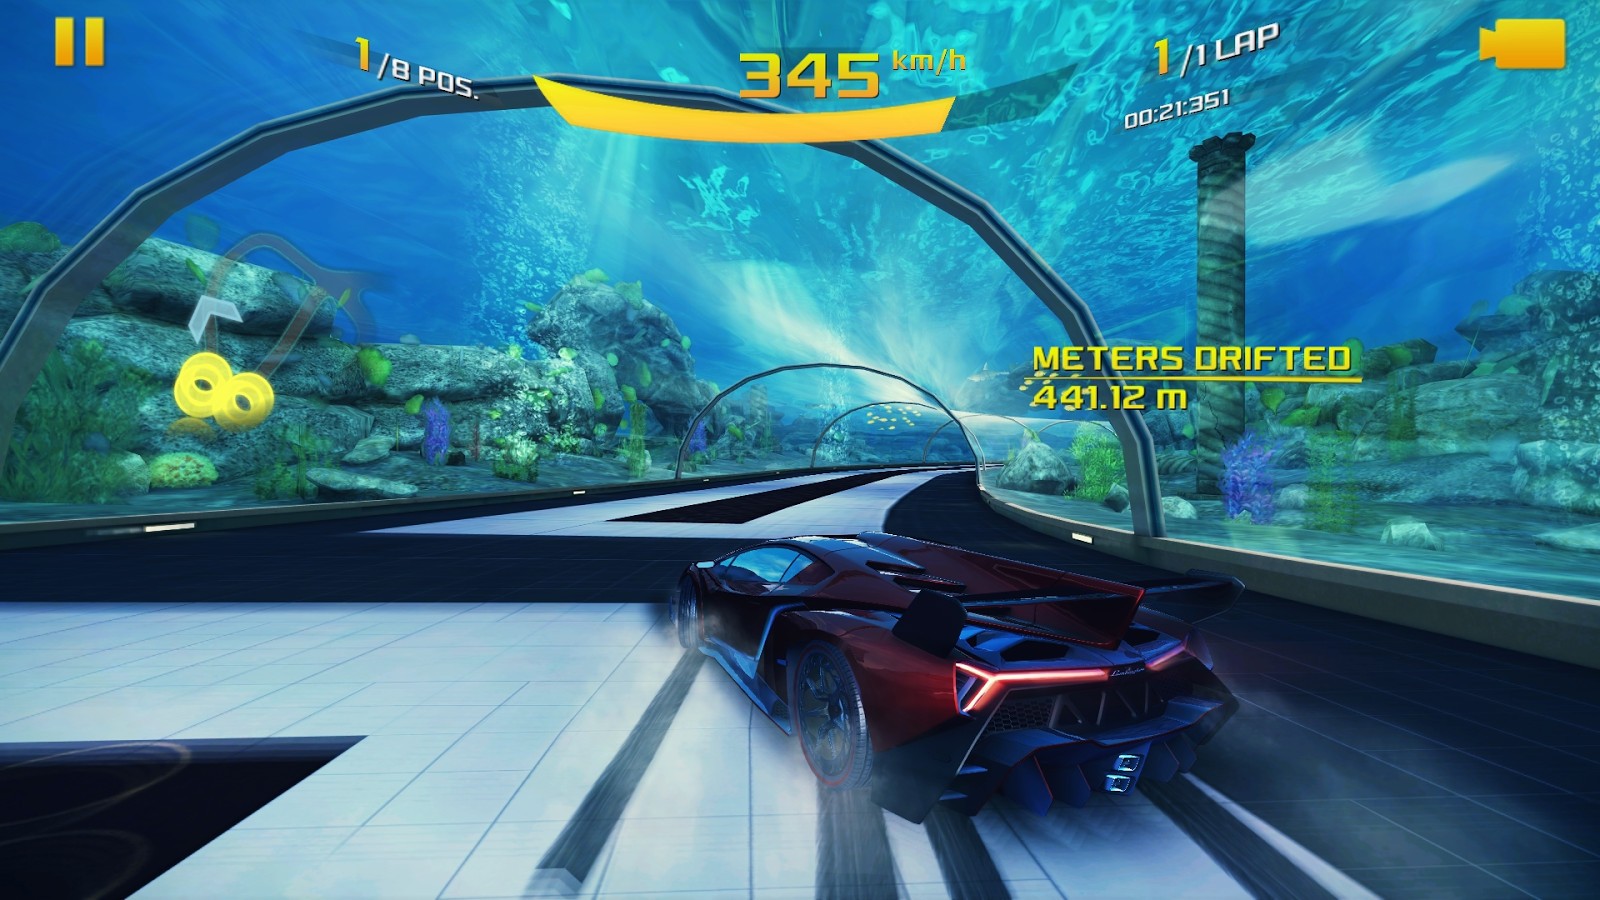 asphalt 8 airborne android review